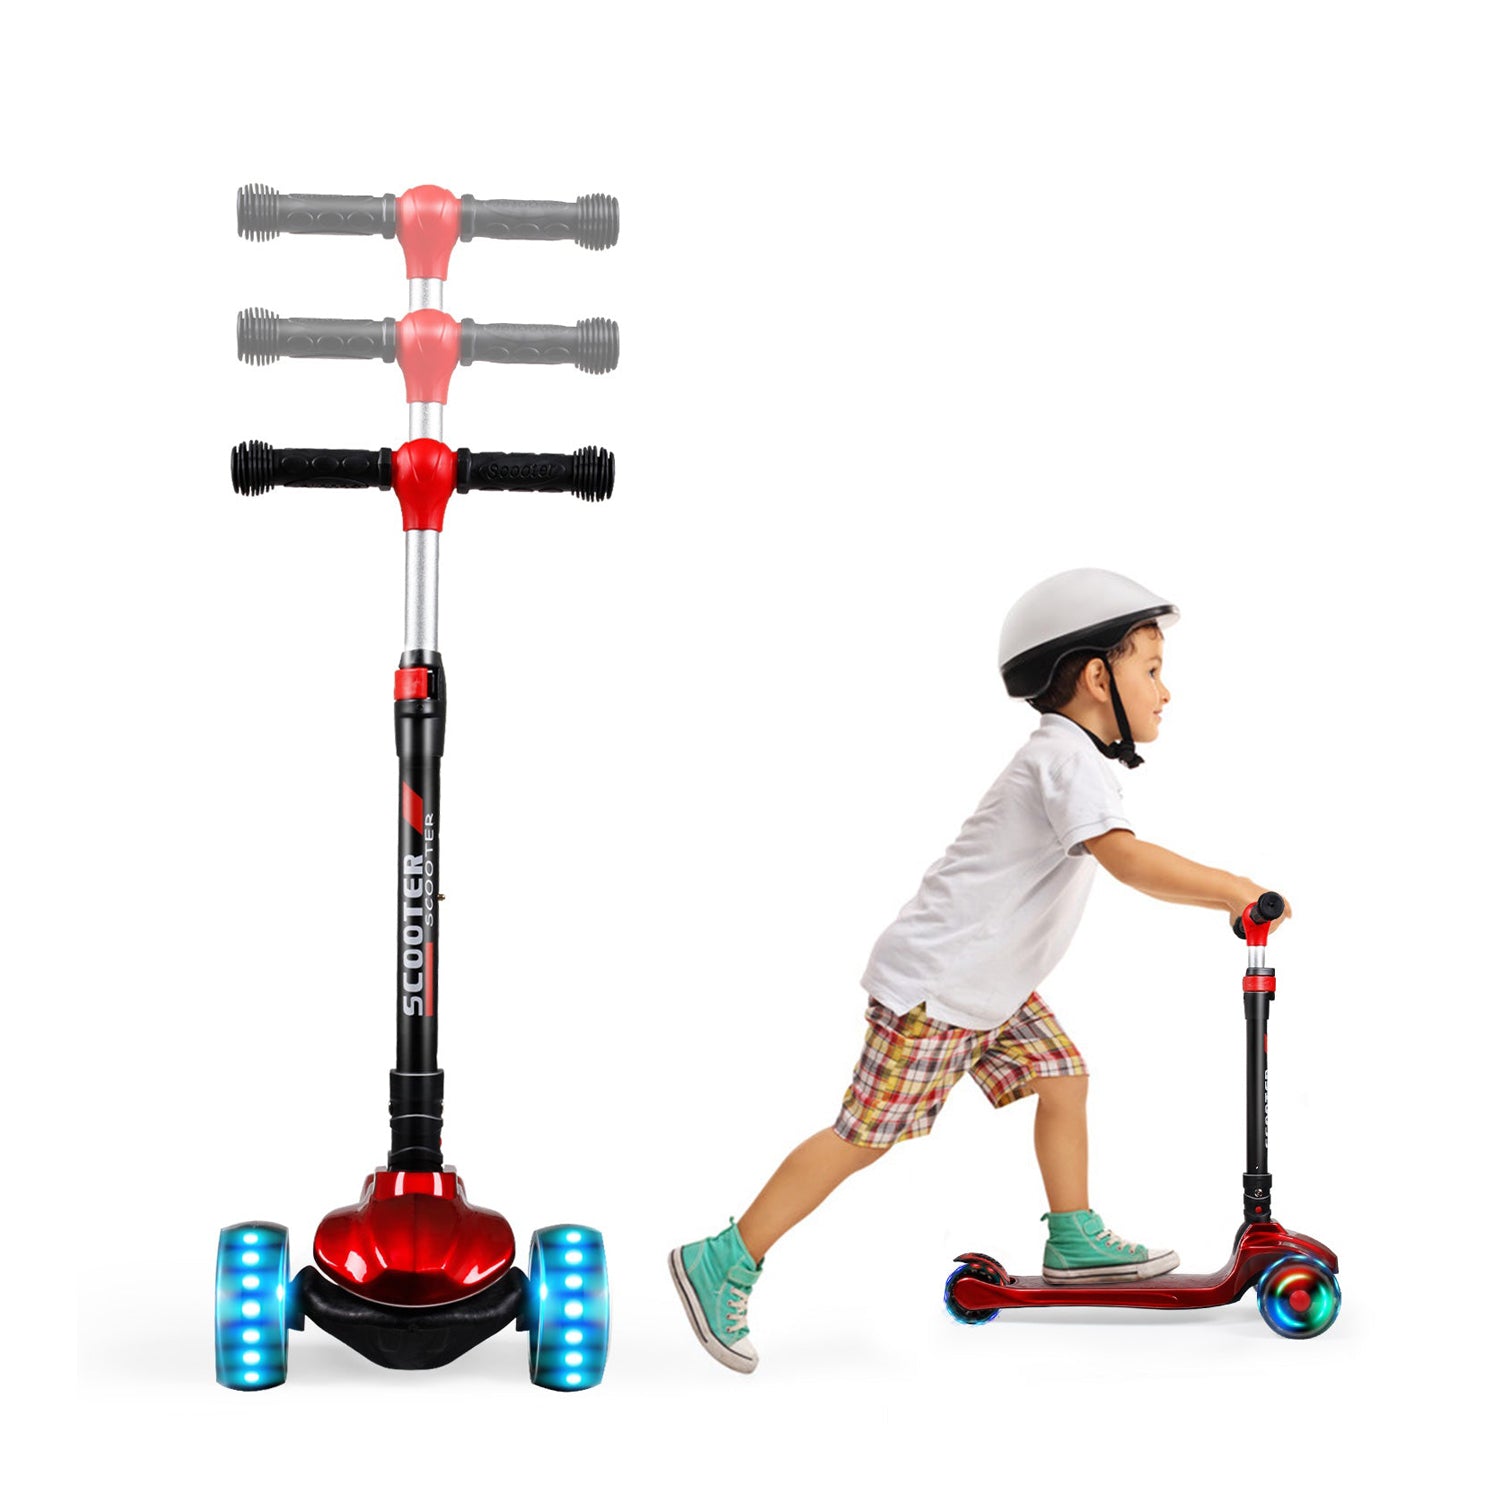 SISIGAD 108 Kick Scooter for Kids (Bright Red/Blue/Black) - SISIGAD